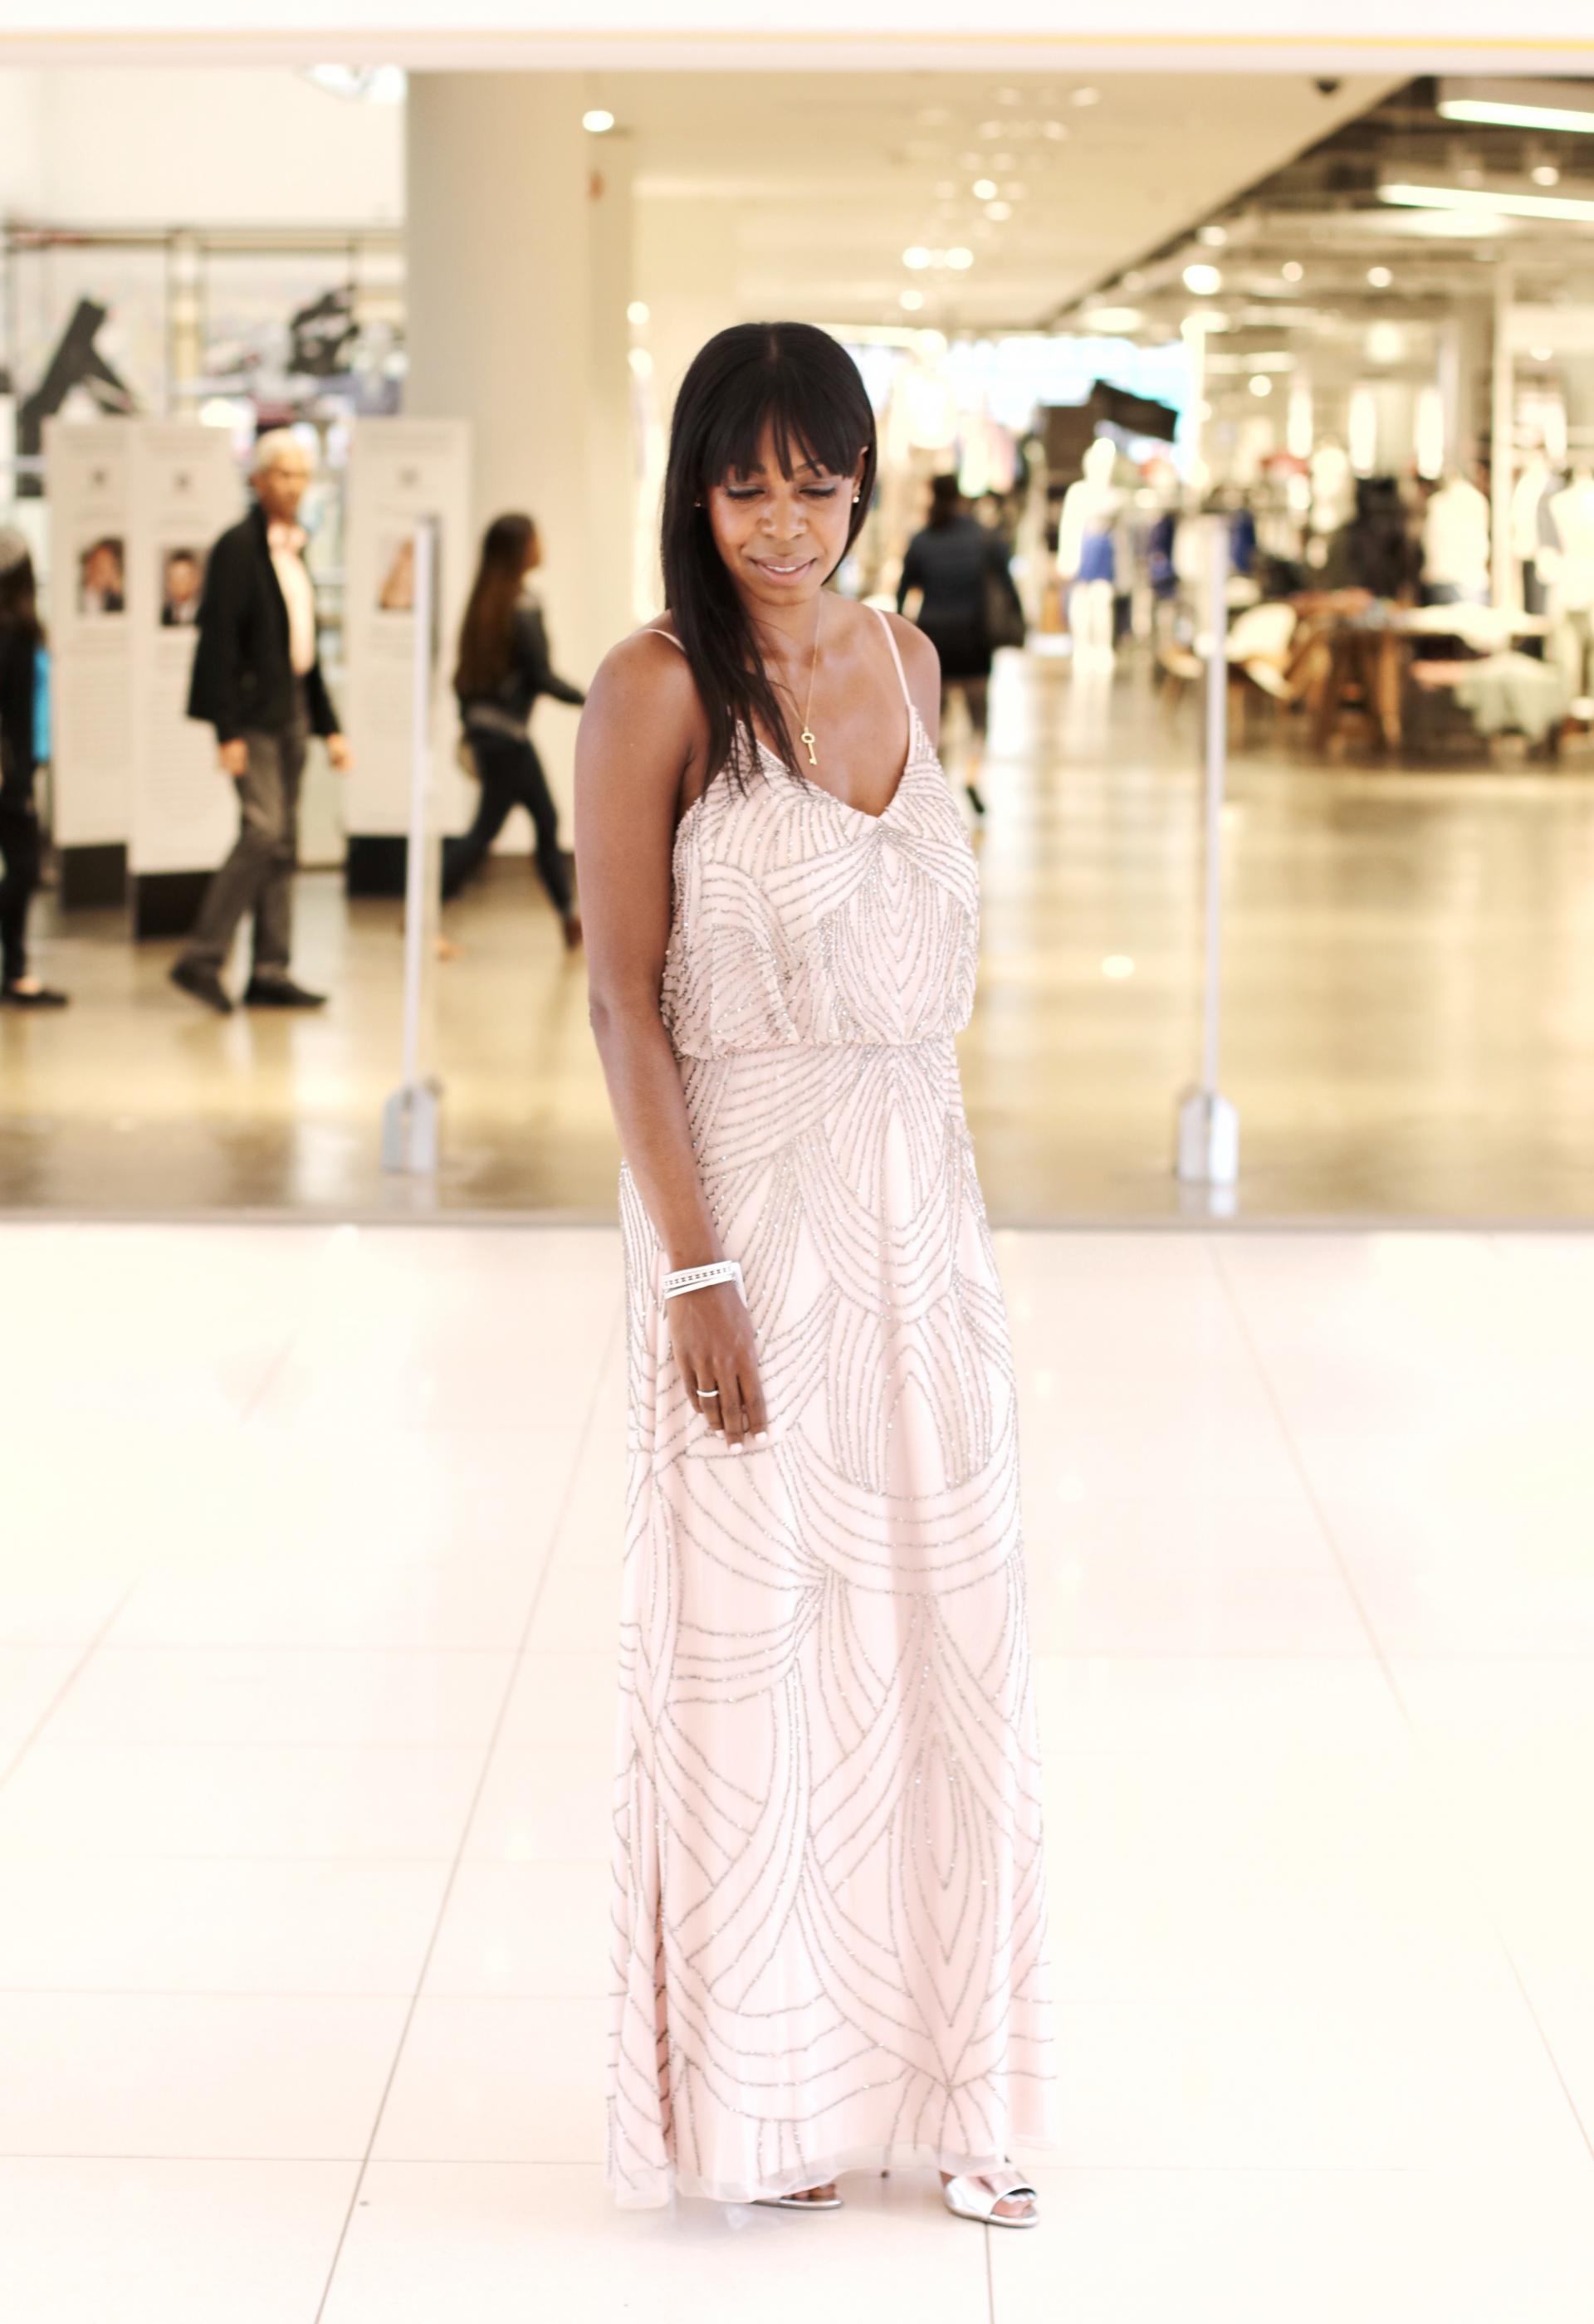 GGPAA Glam with The Hudson's Bay | www.styledomination.com